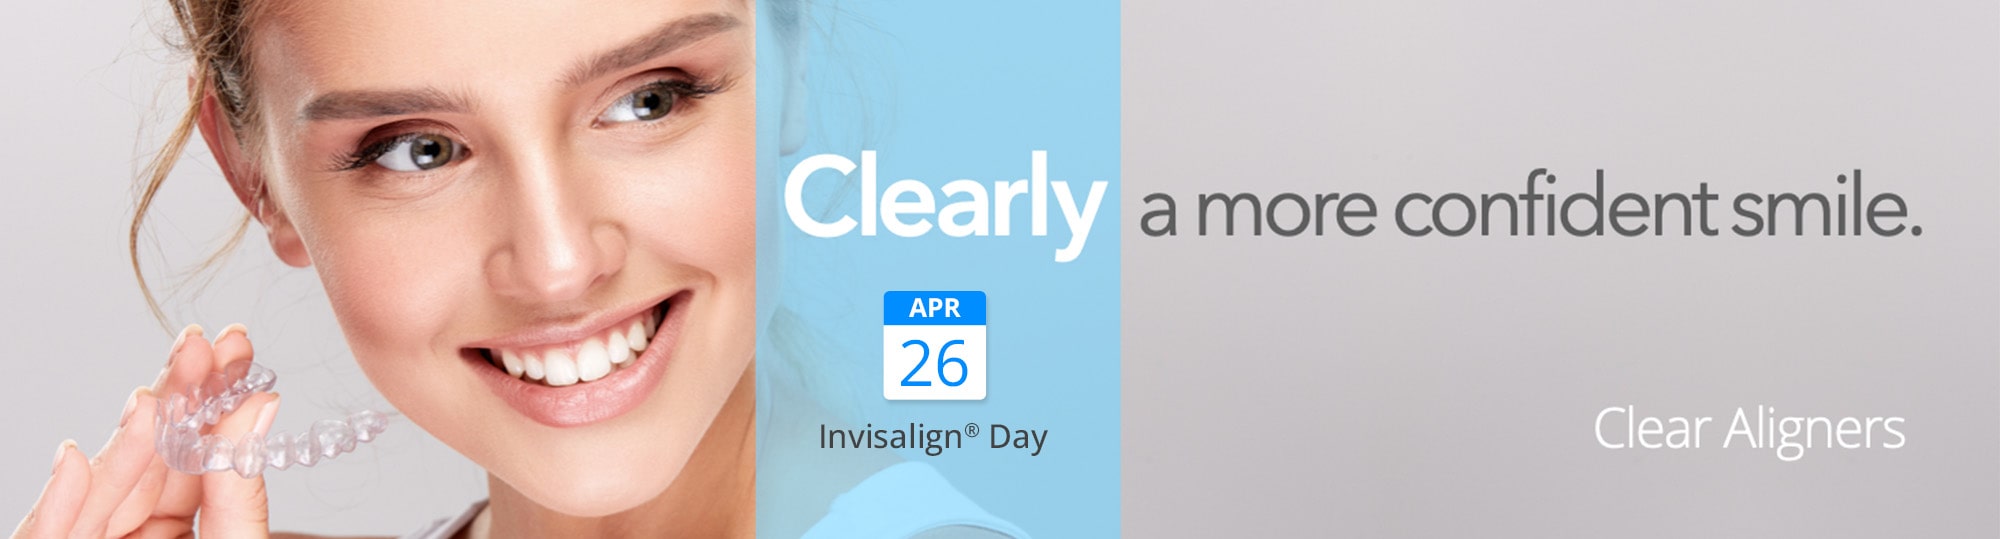 invisalign day special event banner